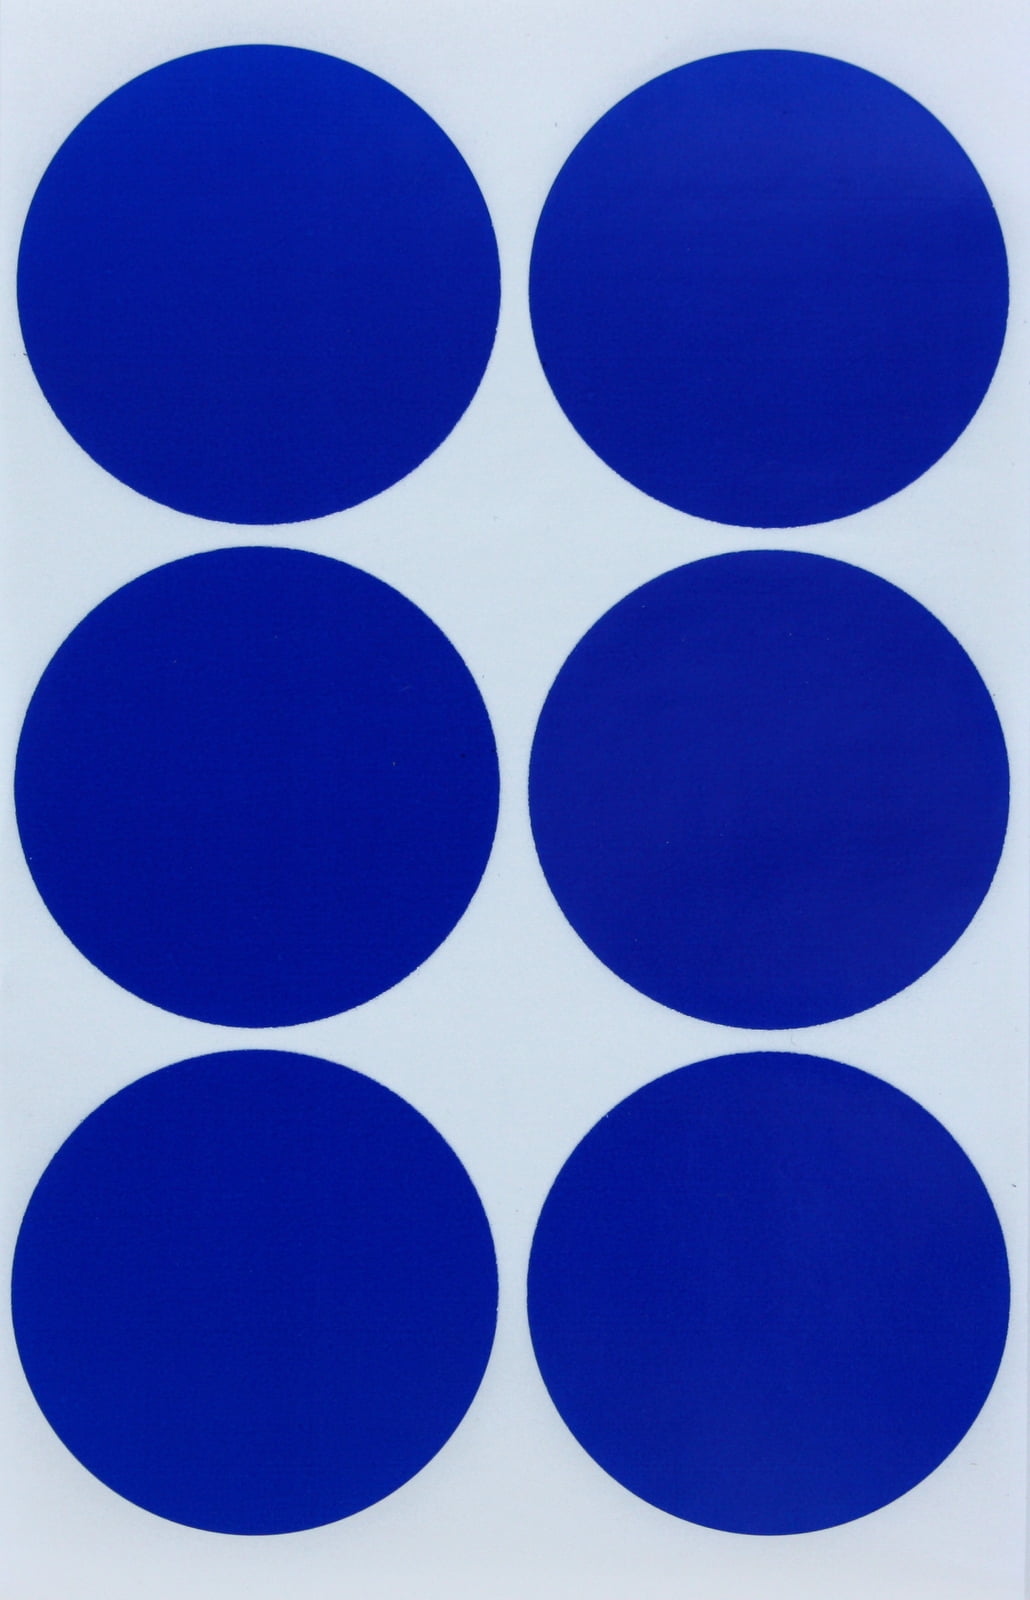  3” Round Number 1-50 Adhesive Stickers in Blue, Red, Black - 2 Green